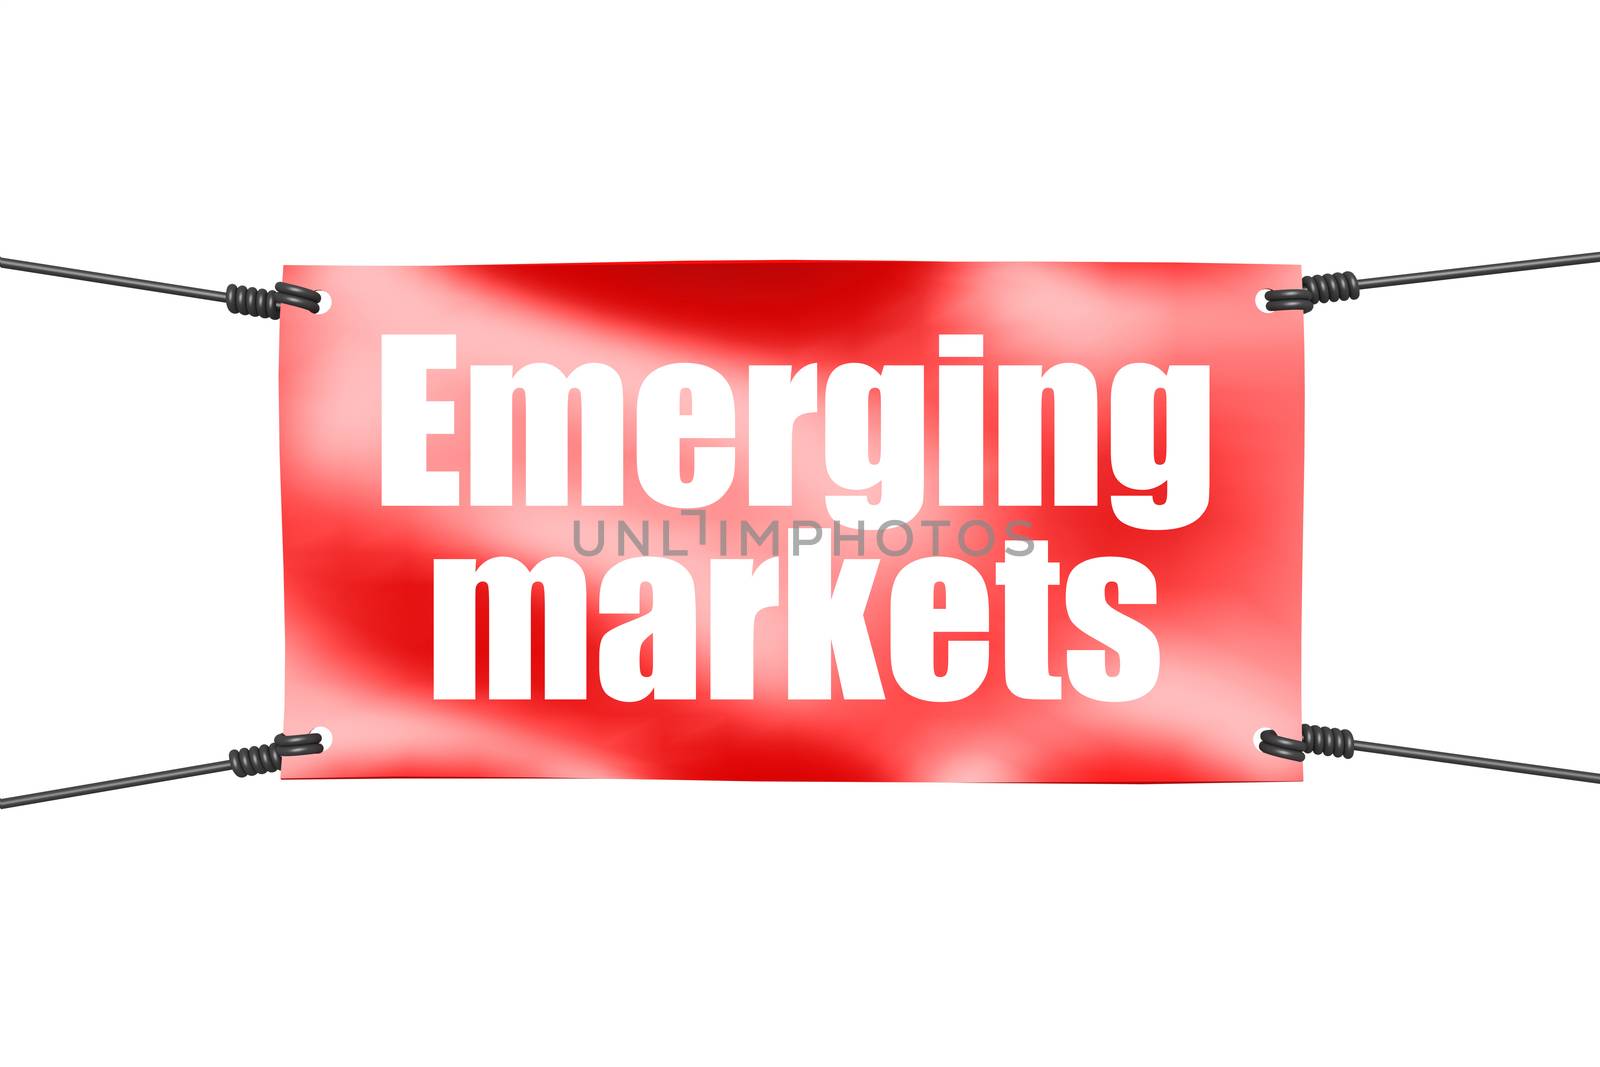 Emerging markets word with red banner by tang90246